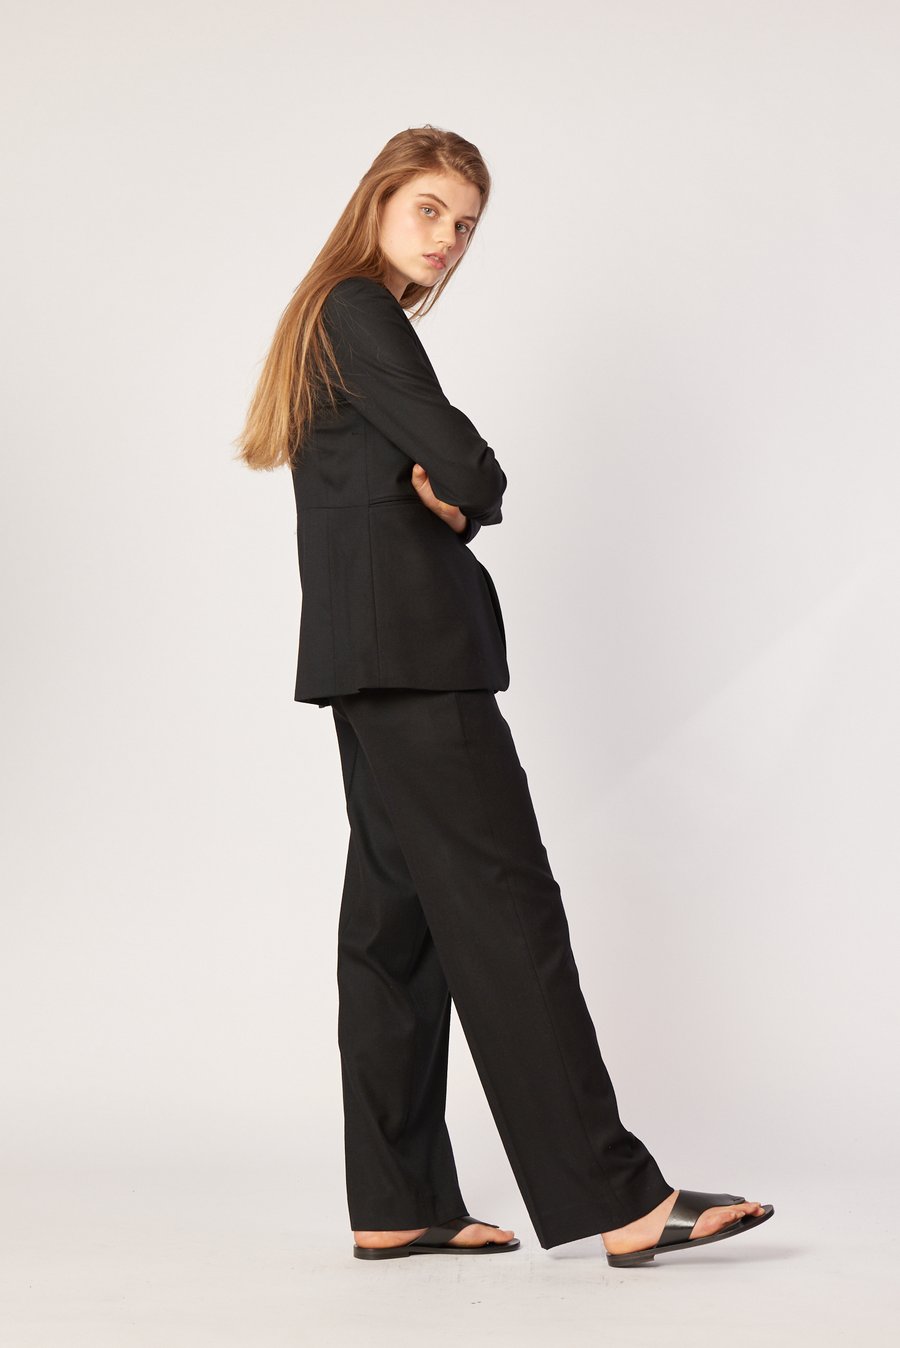 ARNSDORF - SUIT TROUSER - BLACK Side view model view with arms crossed